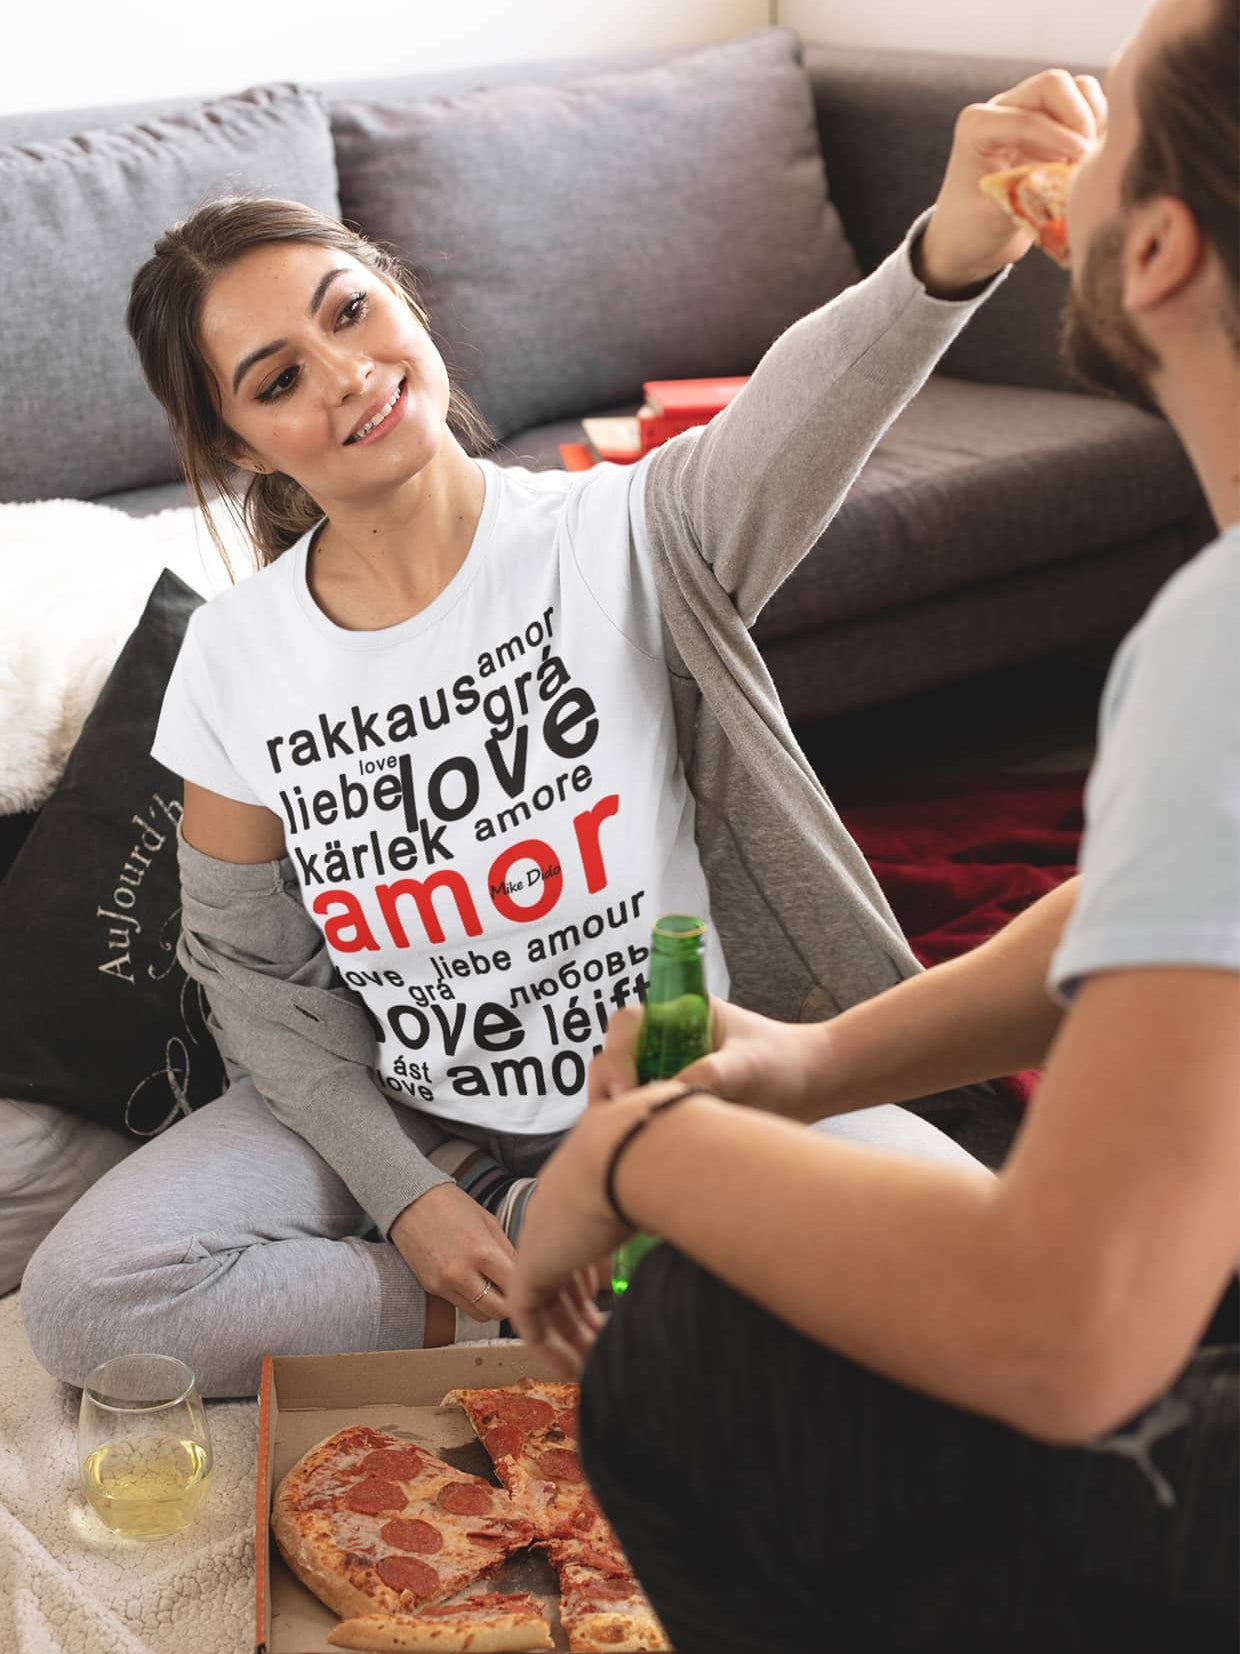 All Day Shirt Amor And Love In Different Languages by Mike Dido